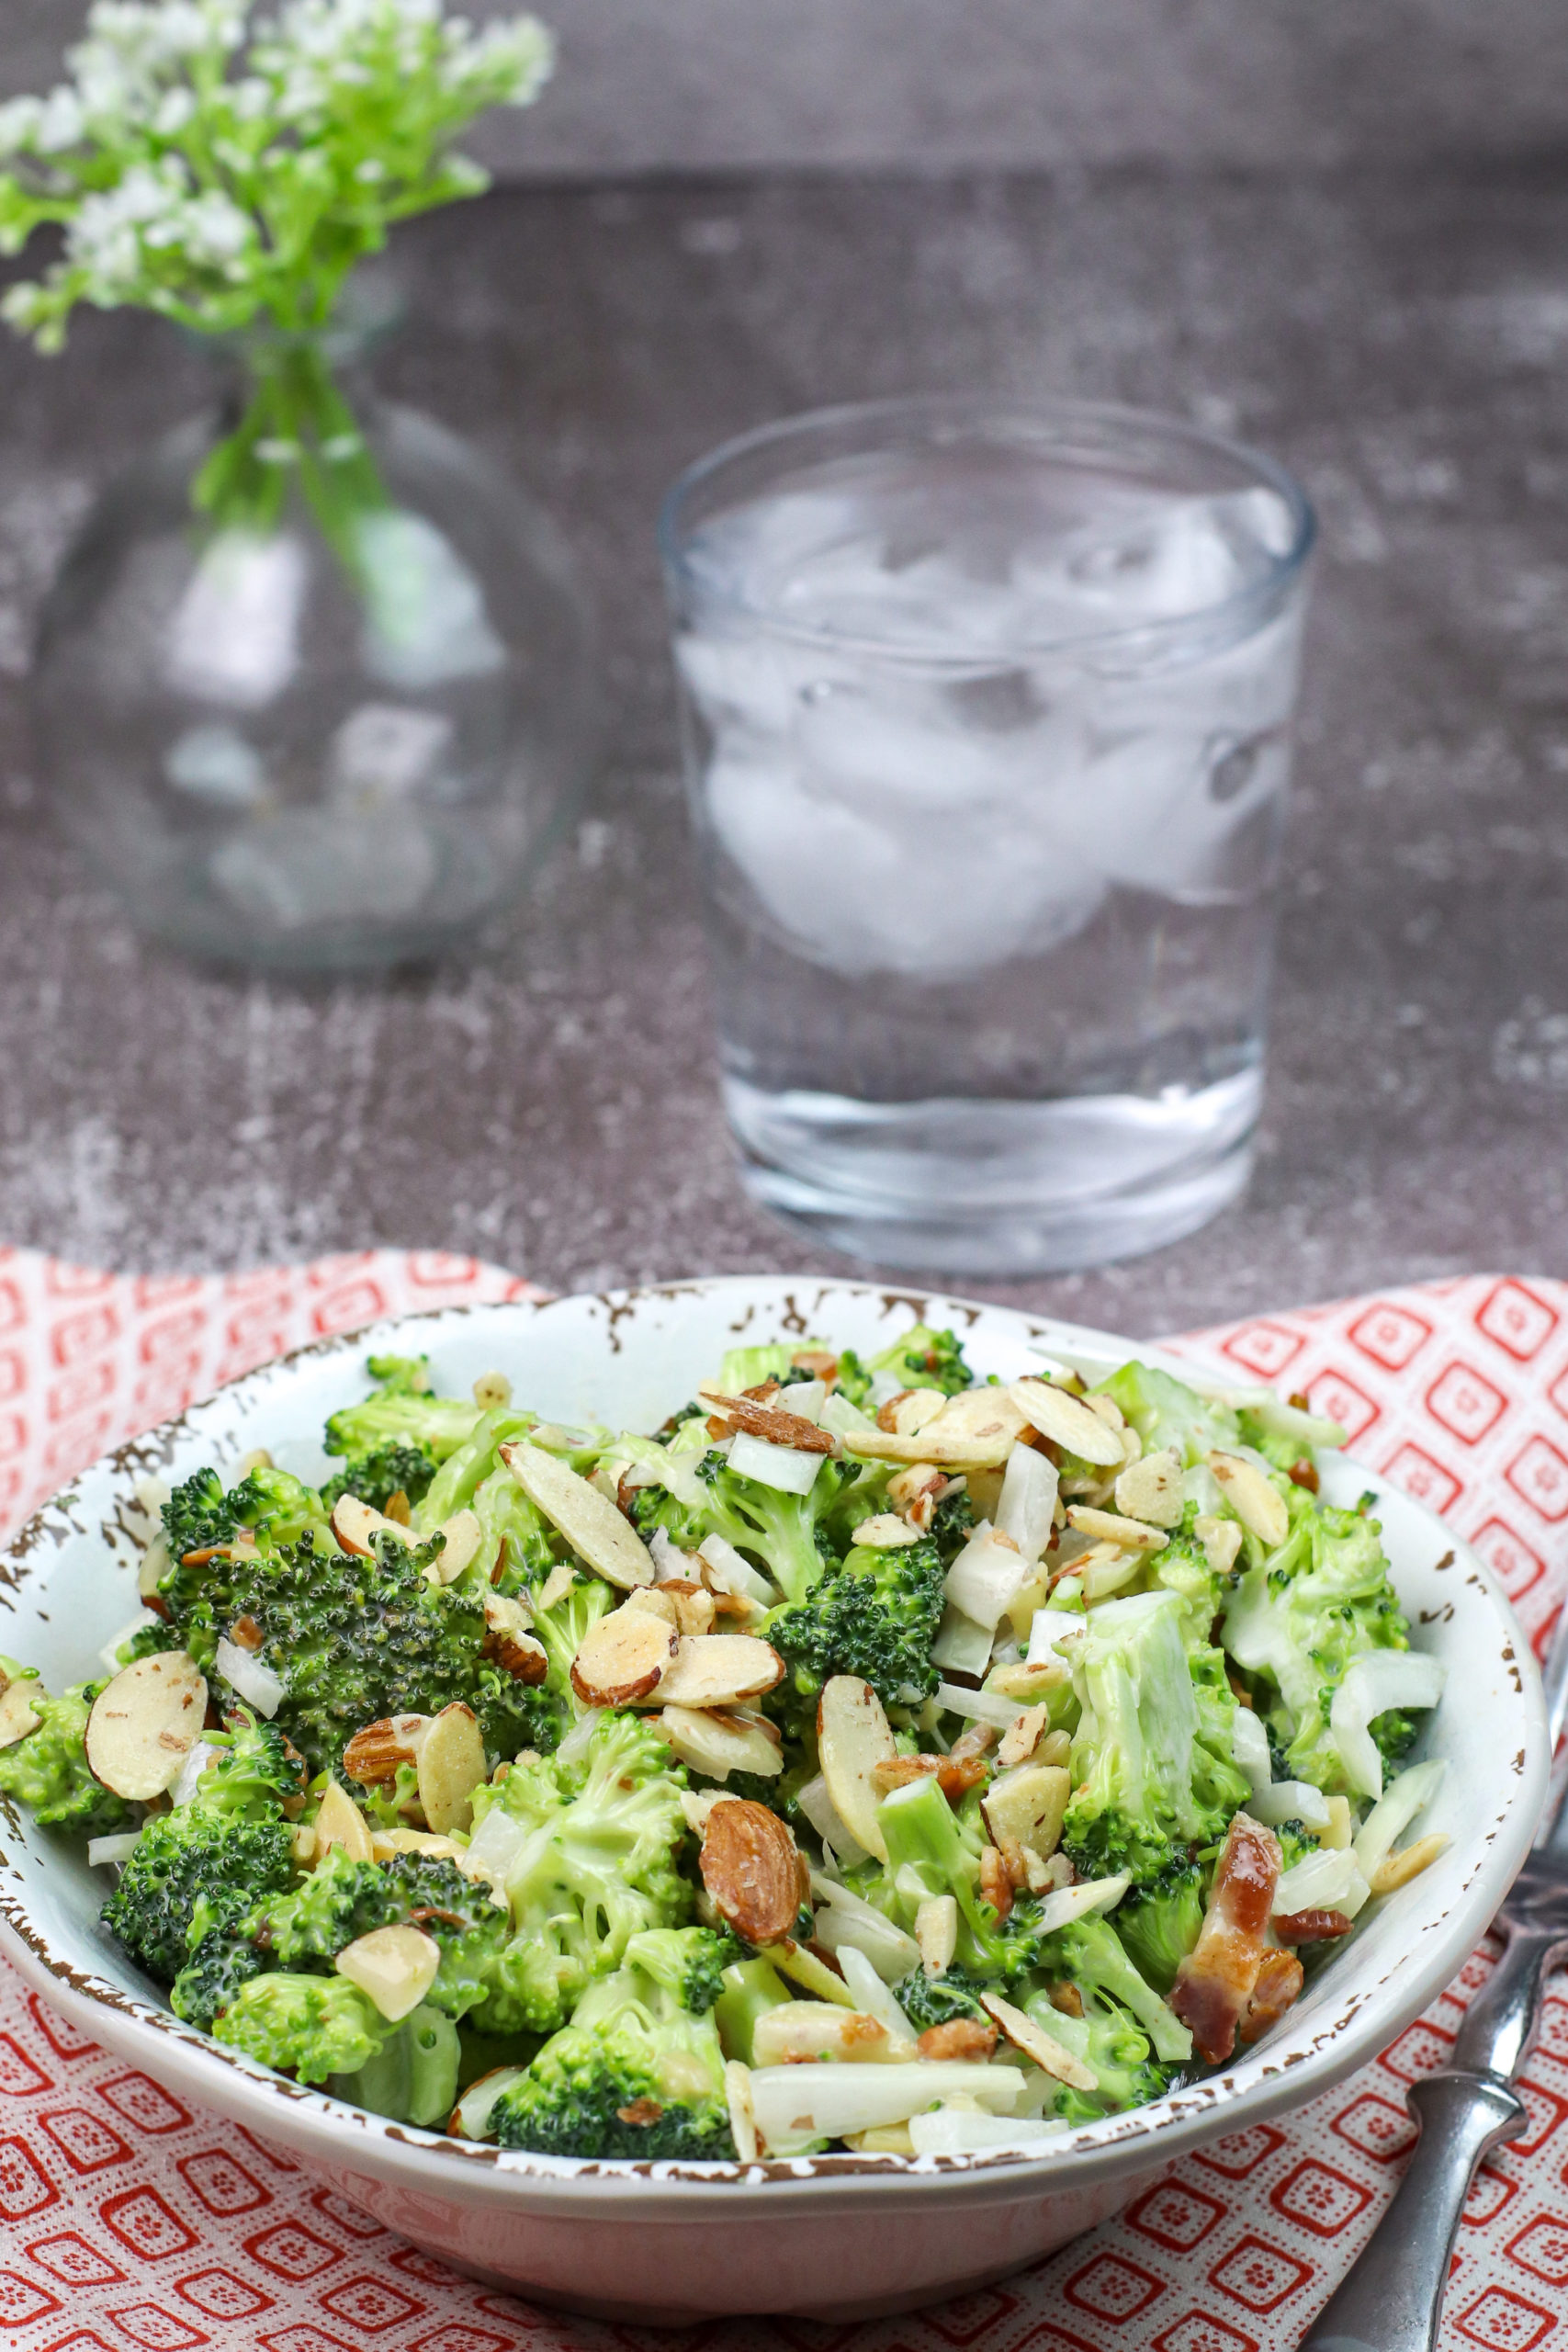 Bowl of broccoli almond salad. A glass of water.